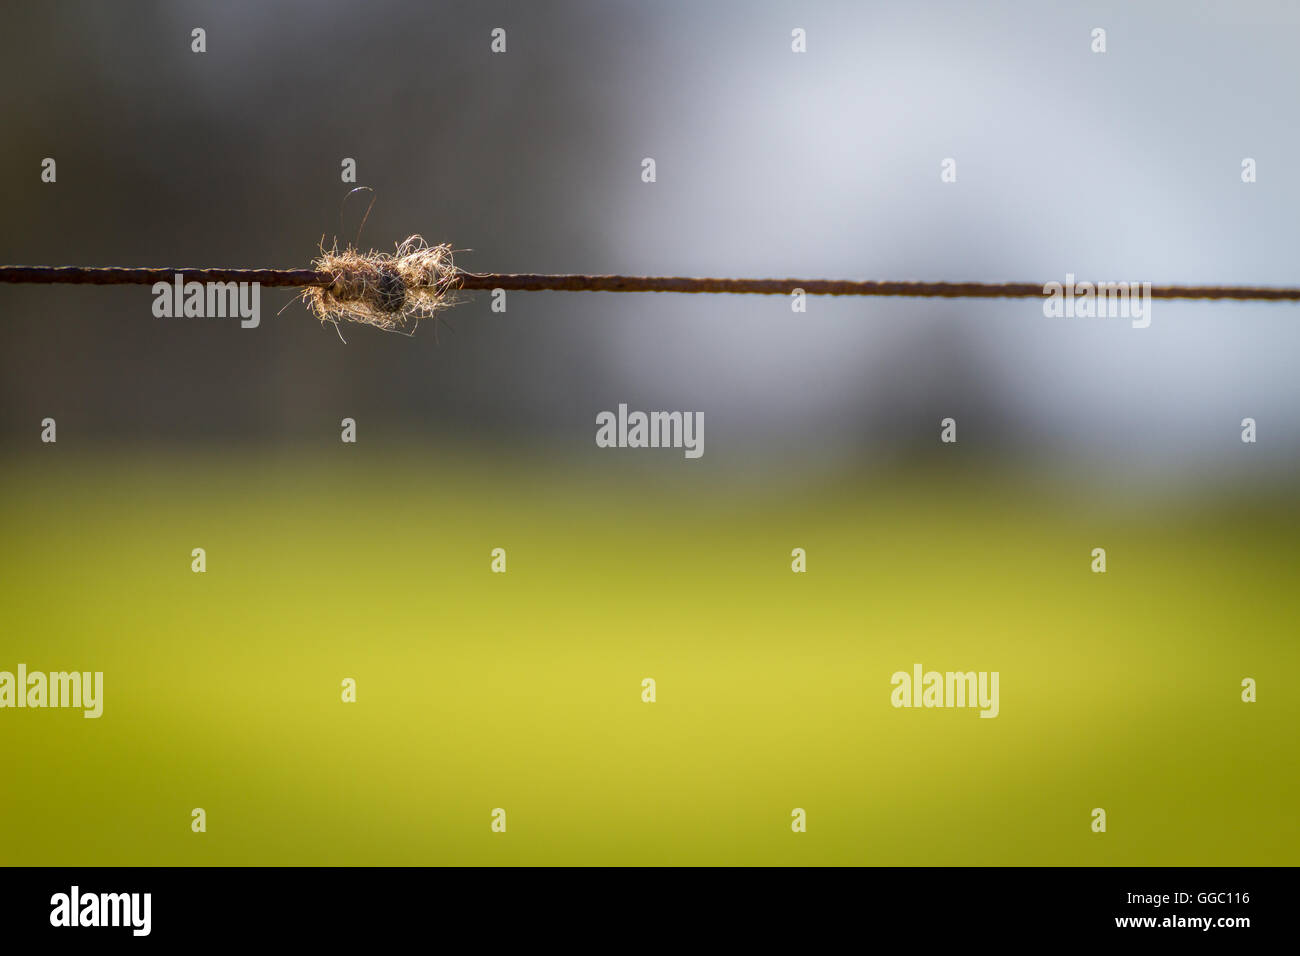 rusty fence wire with animal hair fur snagged Stock Photo